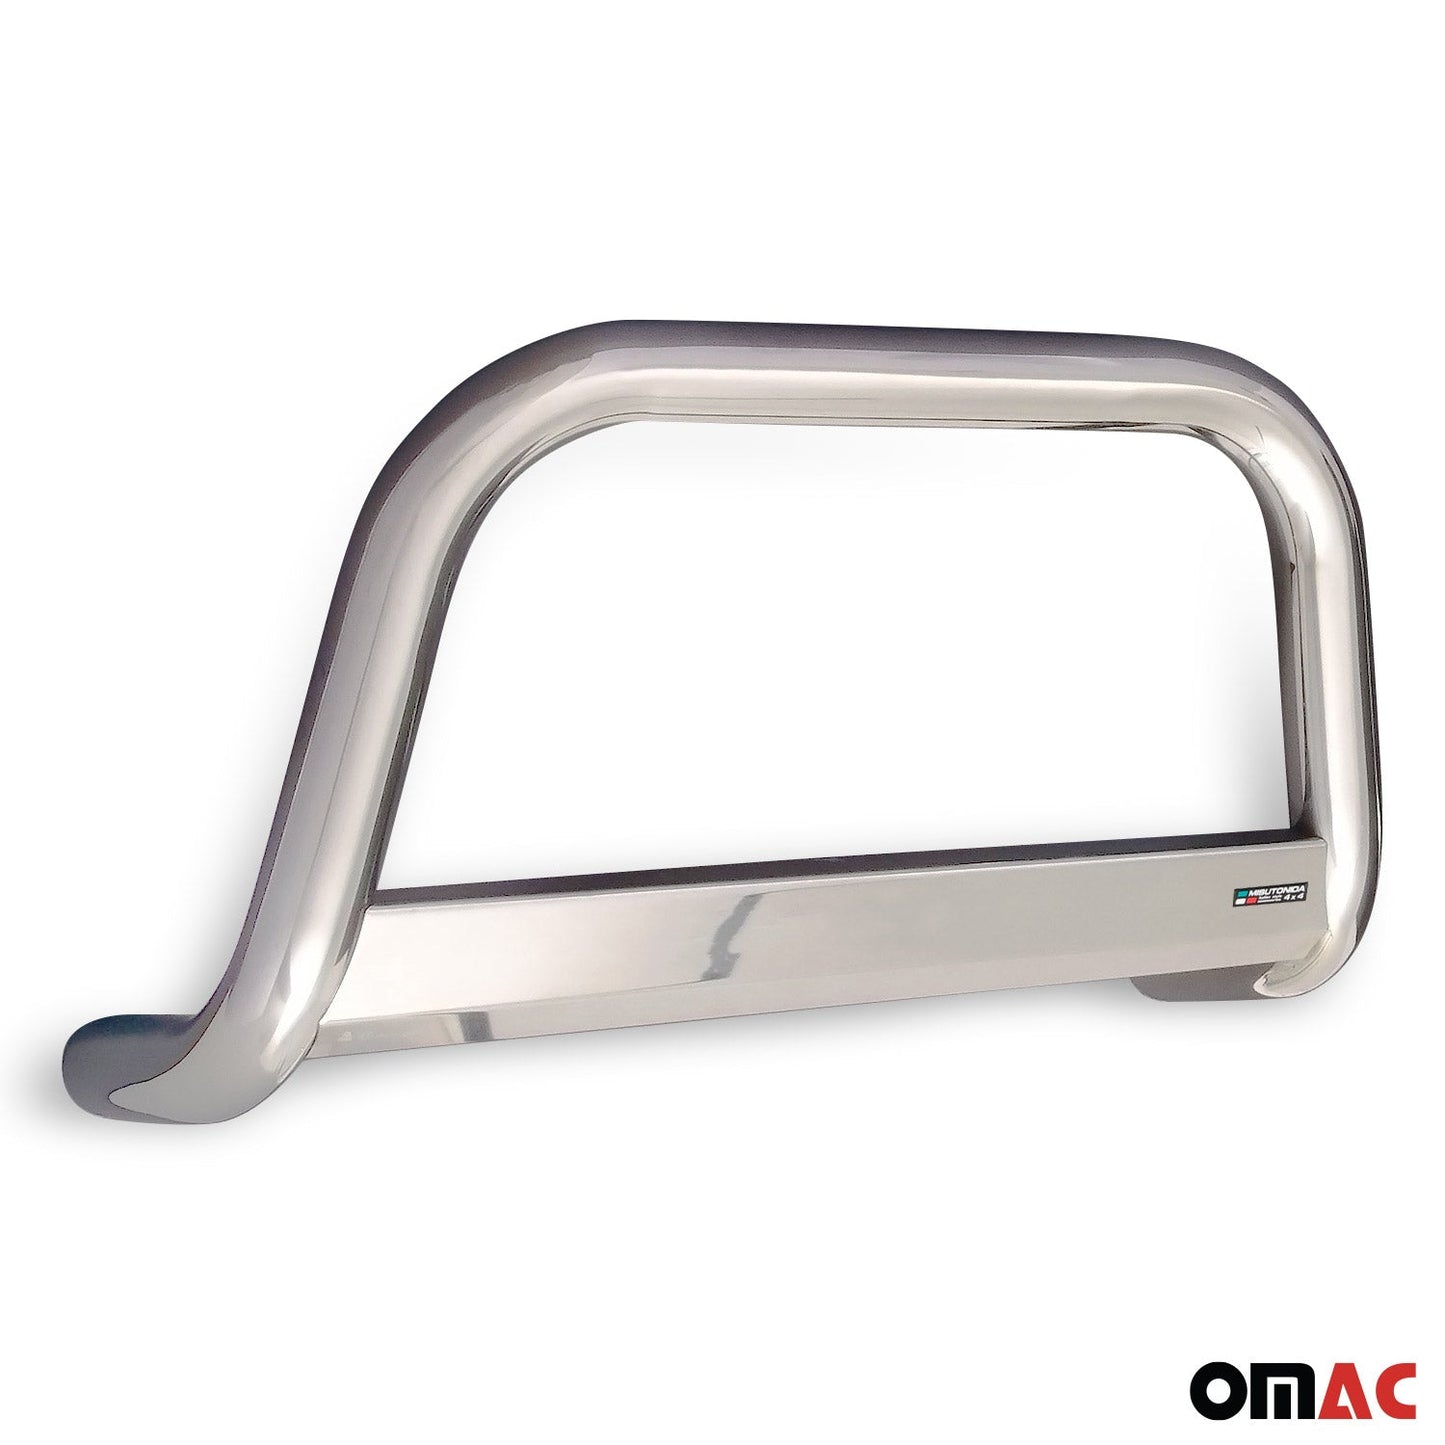 OMAC Bull Bar For Fiat 500X 2016-2018 Front Bumper Grill Guard Stainless Steel Silver 2541MSBB067